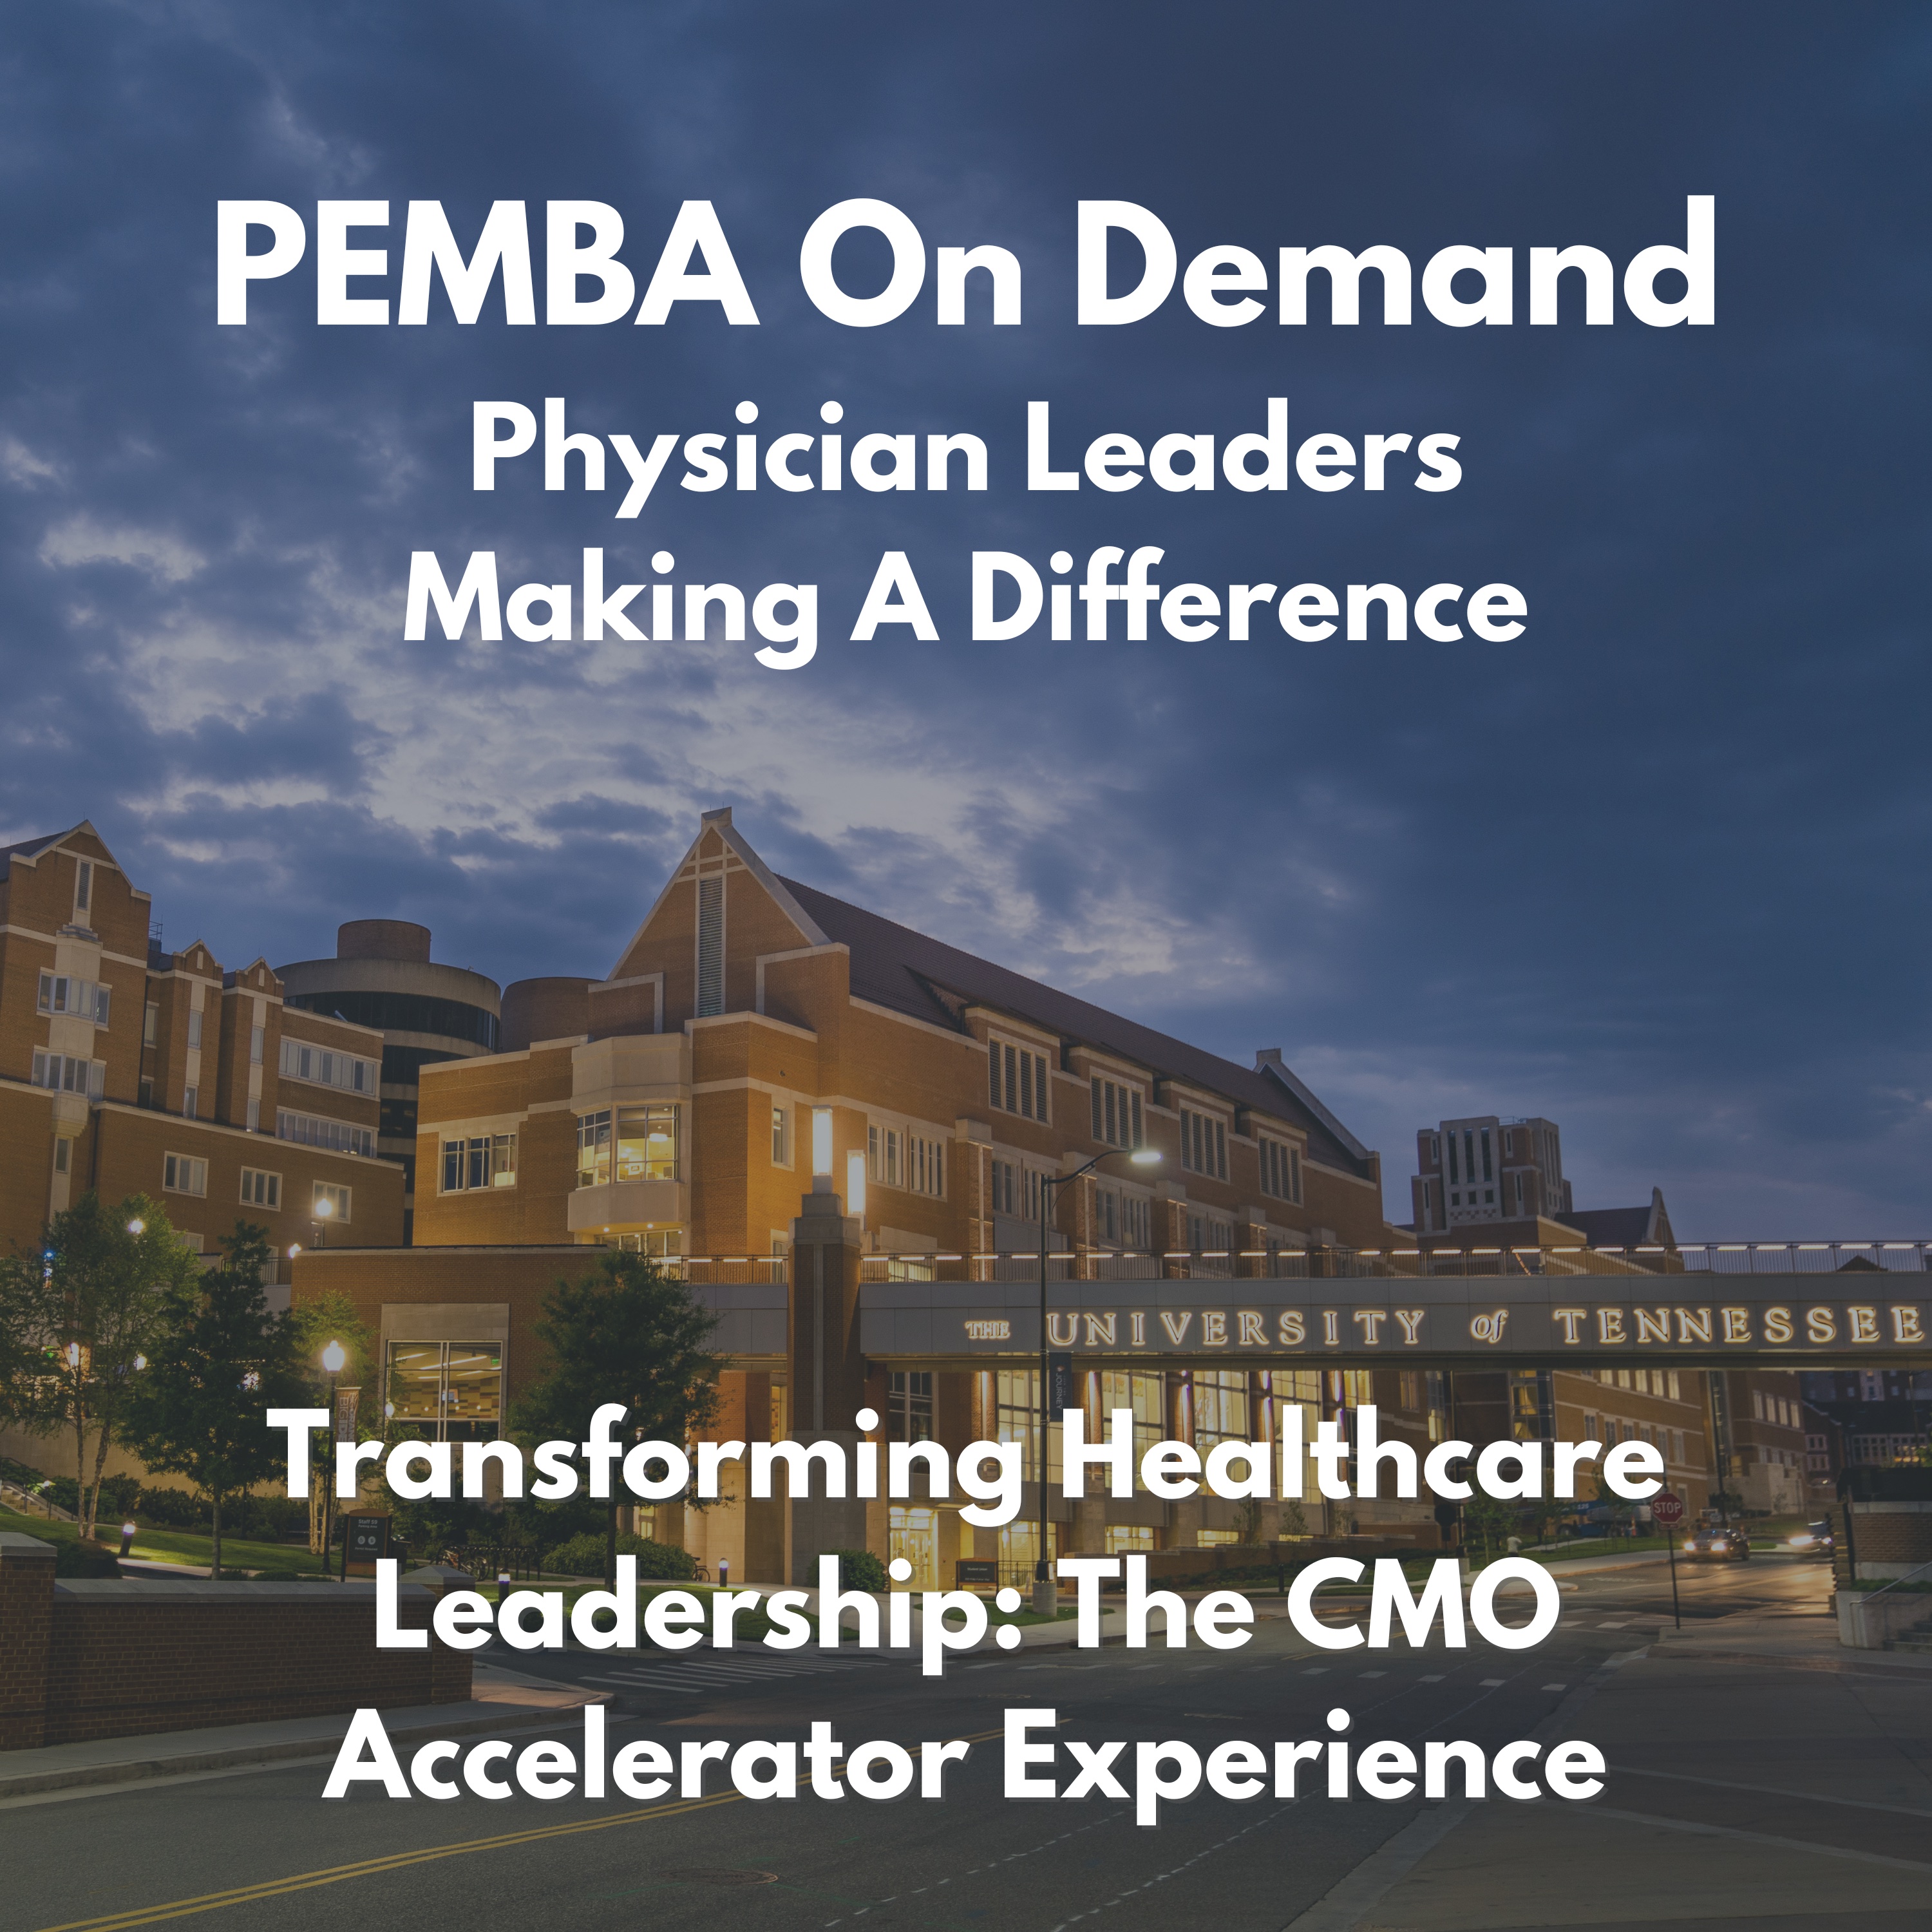 Transforming Healthcare Leadership: The CMO Accelerator Experience